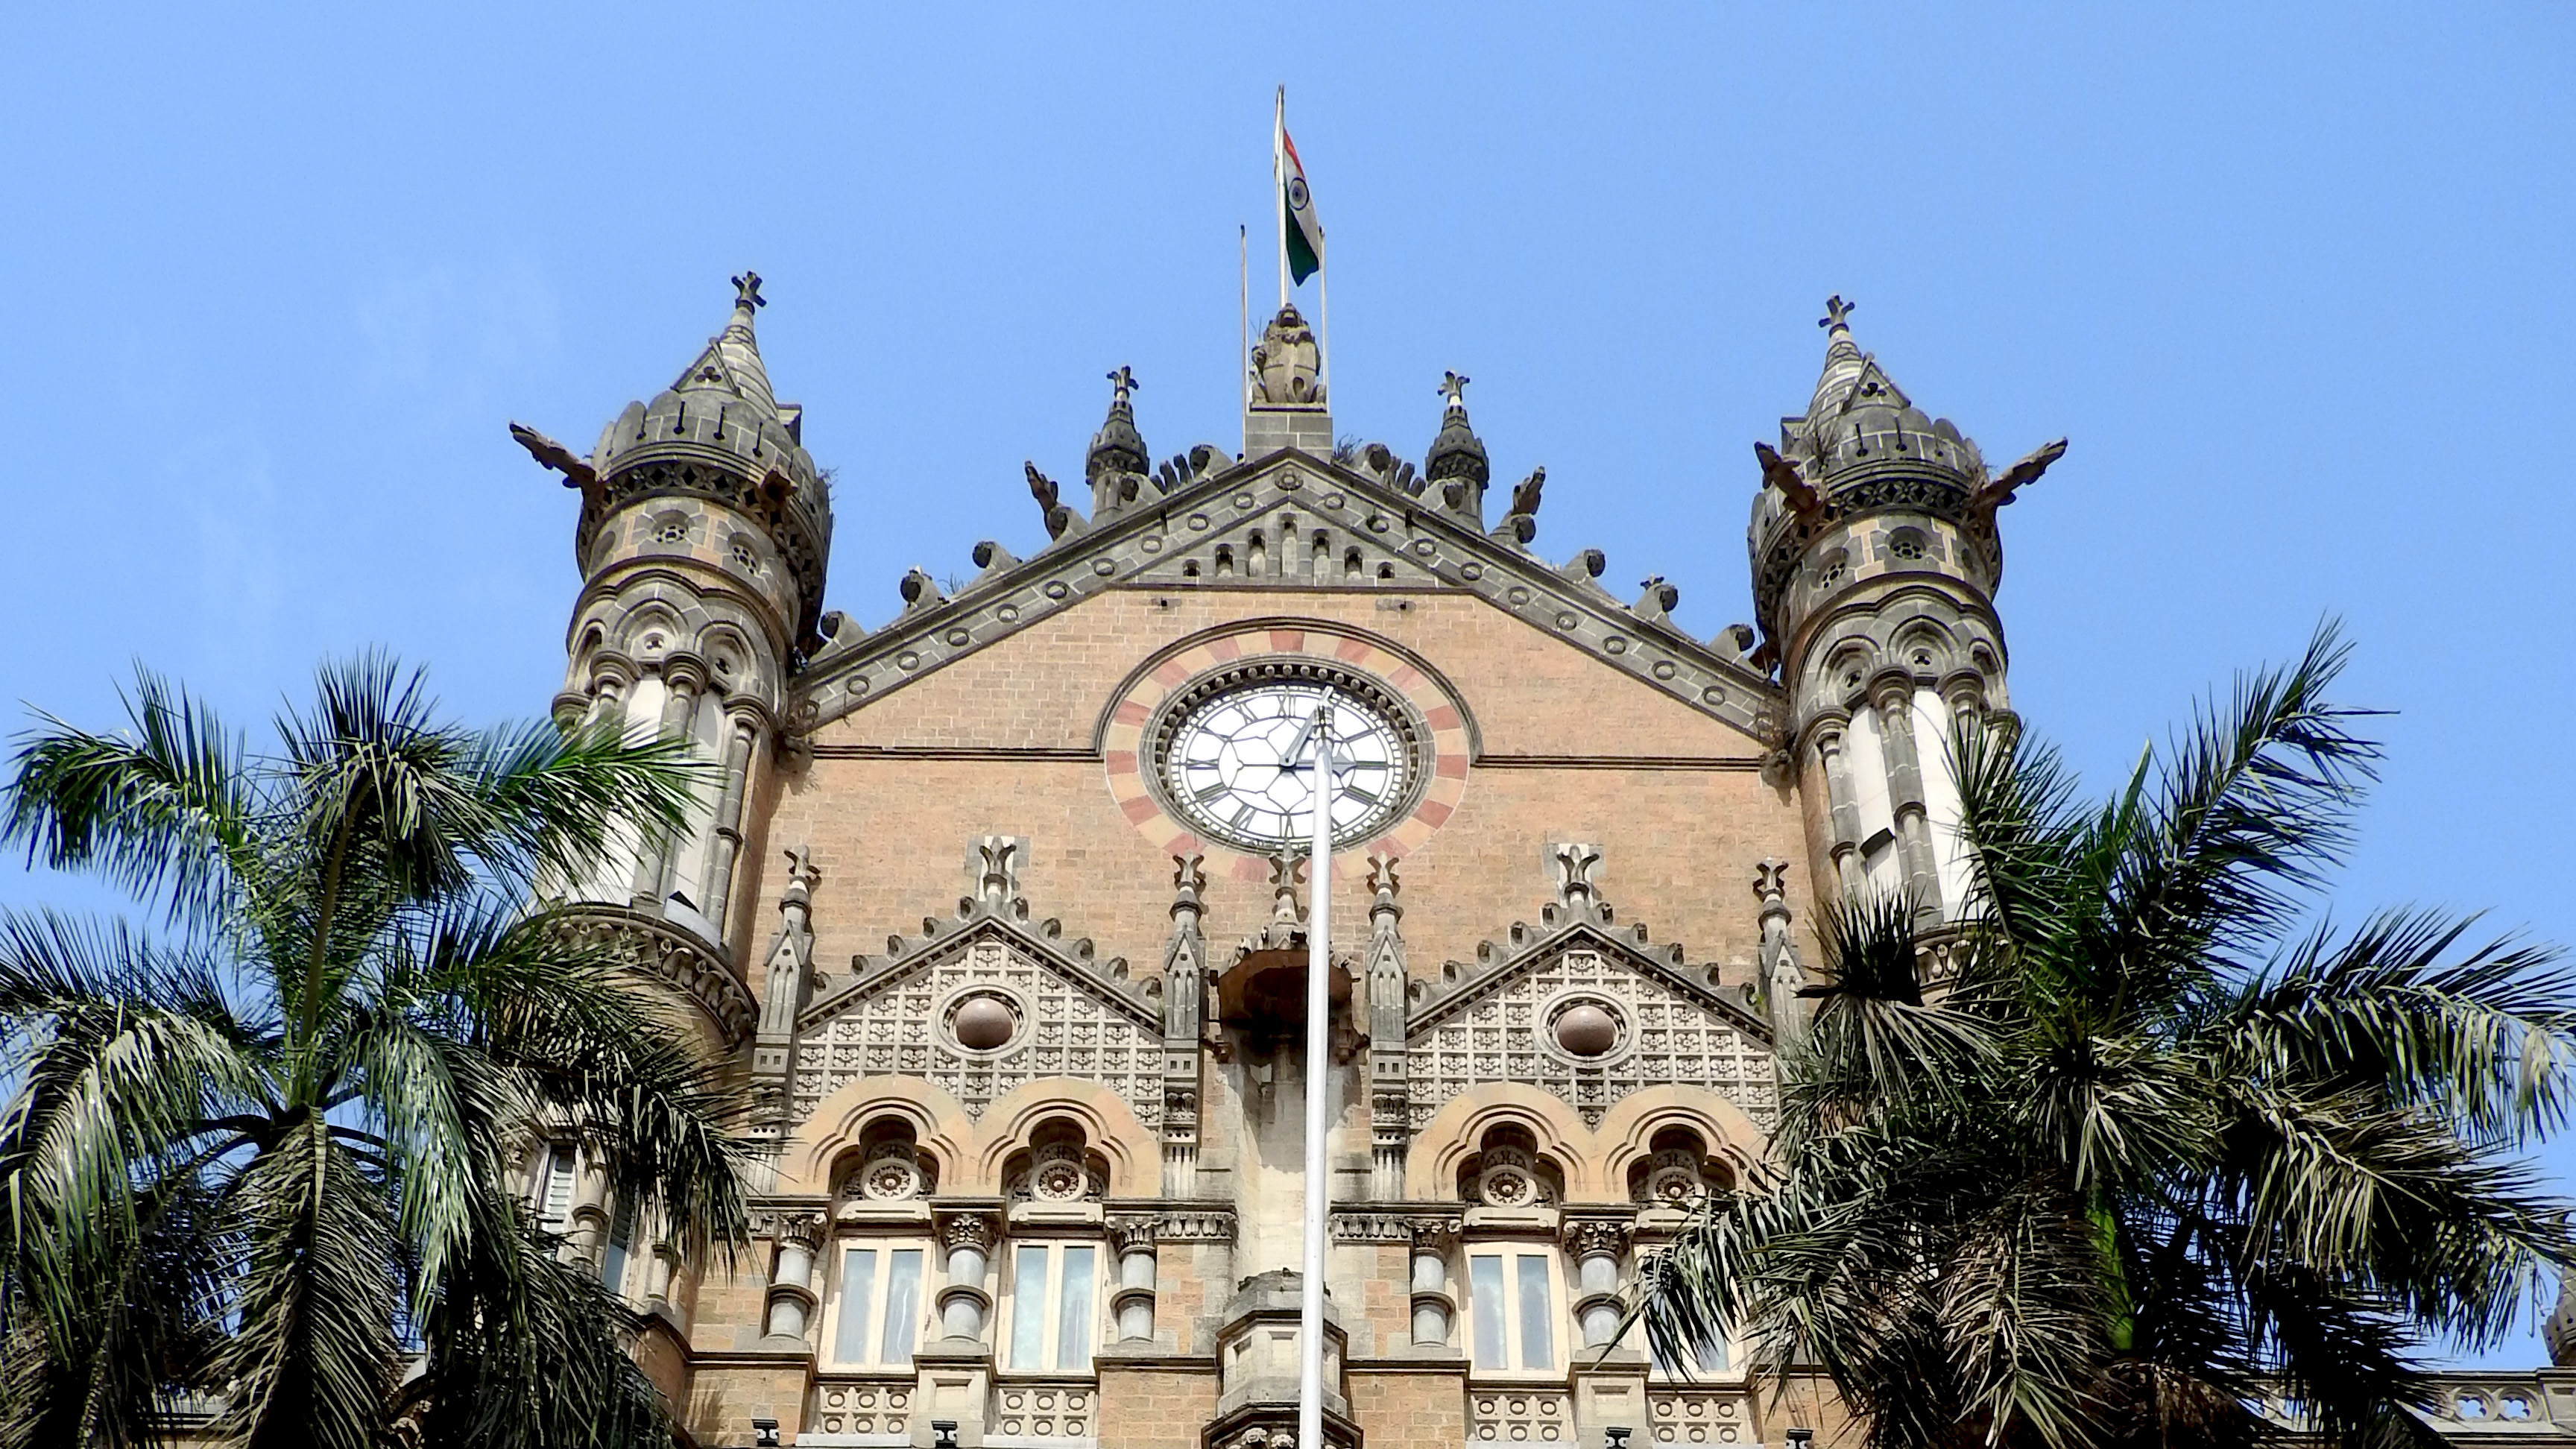 An unmissable landmark is the majestic Chhatrapati Shivaji Maharaj Terminus Railway Terminus (CSMT), formerly known as Victoria Terminus. Tucked within is the CSMT Railway Heritage Museum, where visitors can explore the magnificent gothic architecture of the 130-year-old landmark. Photo by Elita Almeida